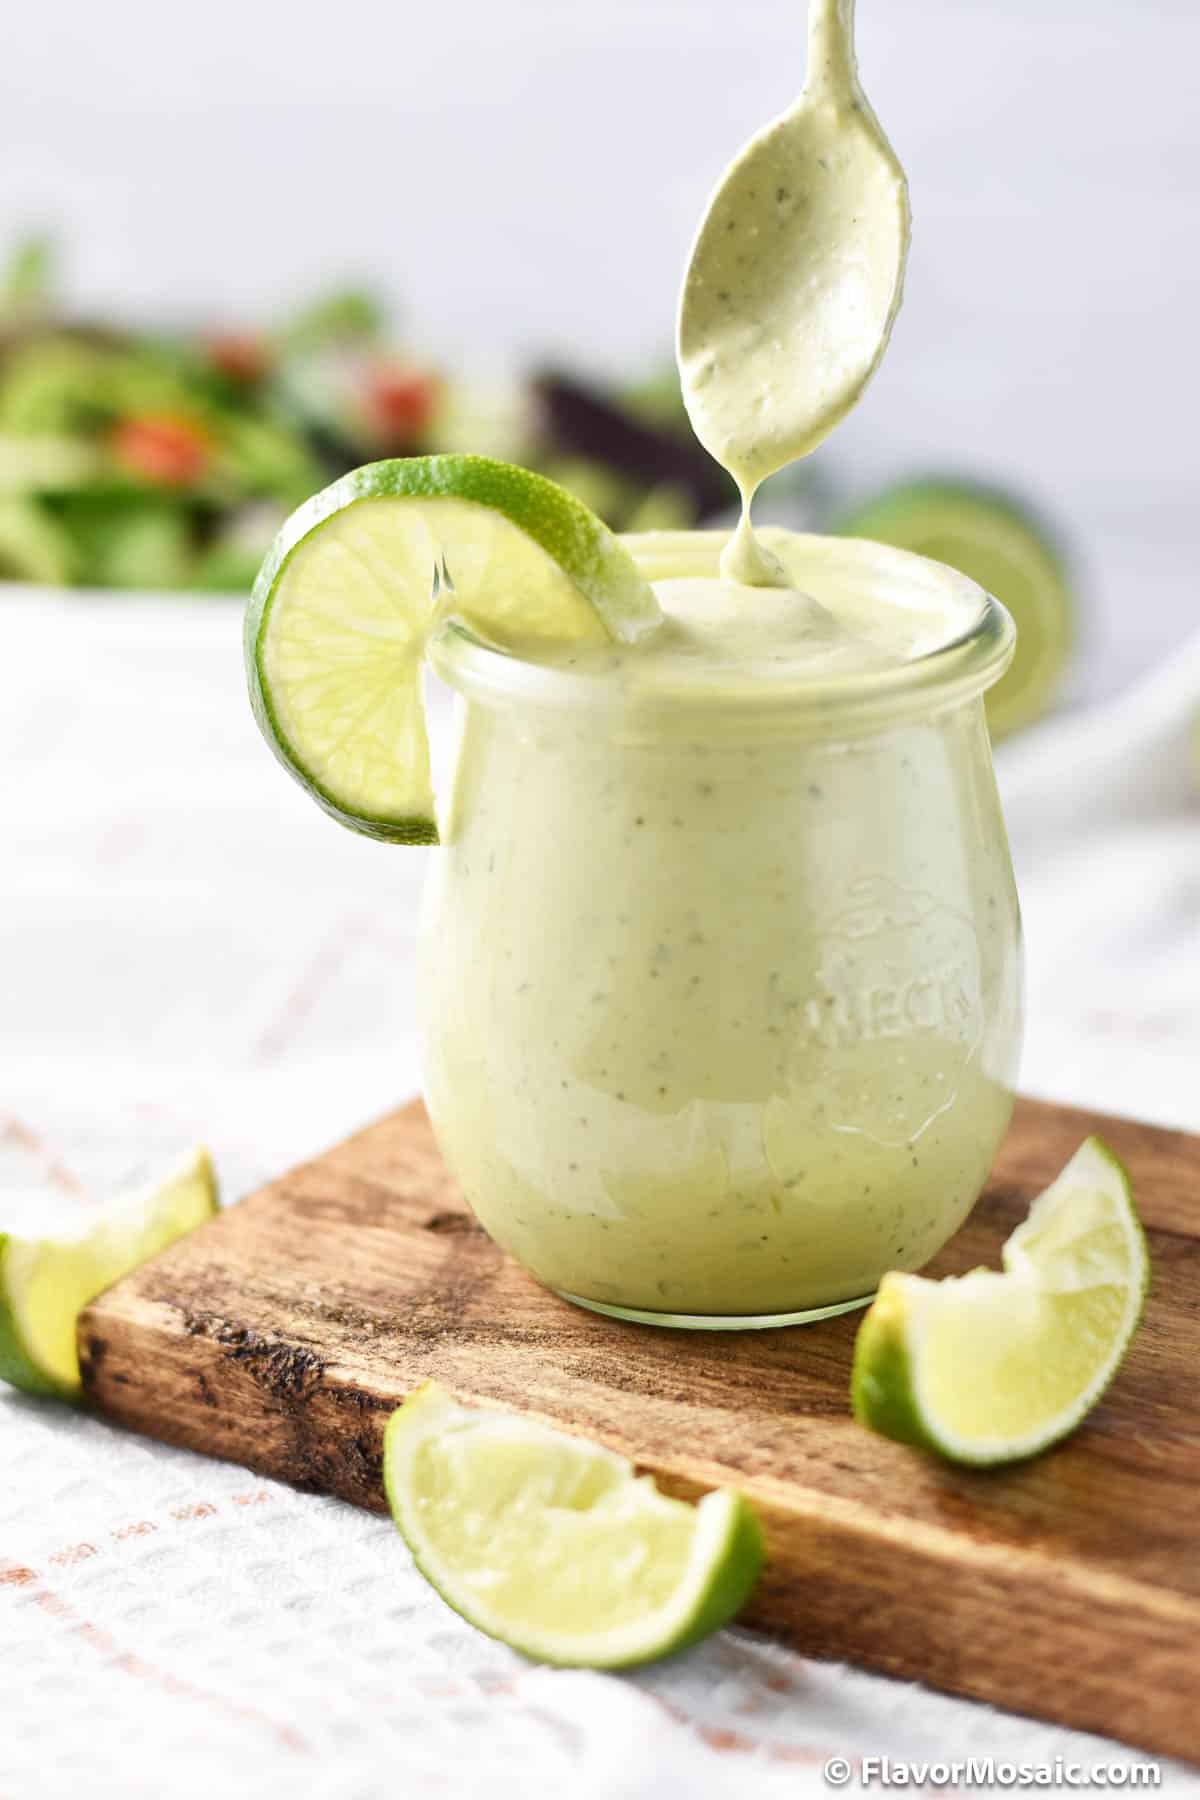 A spoon is held over a glass container of Chick Fil A Avocado Lime Ranch Dressing, sitting on a wood cutting board, in front of a green salad.